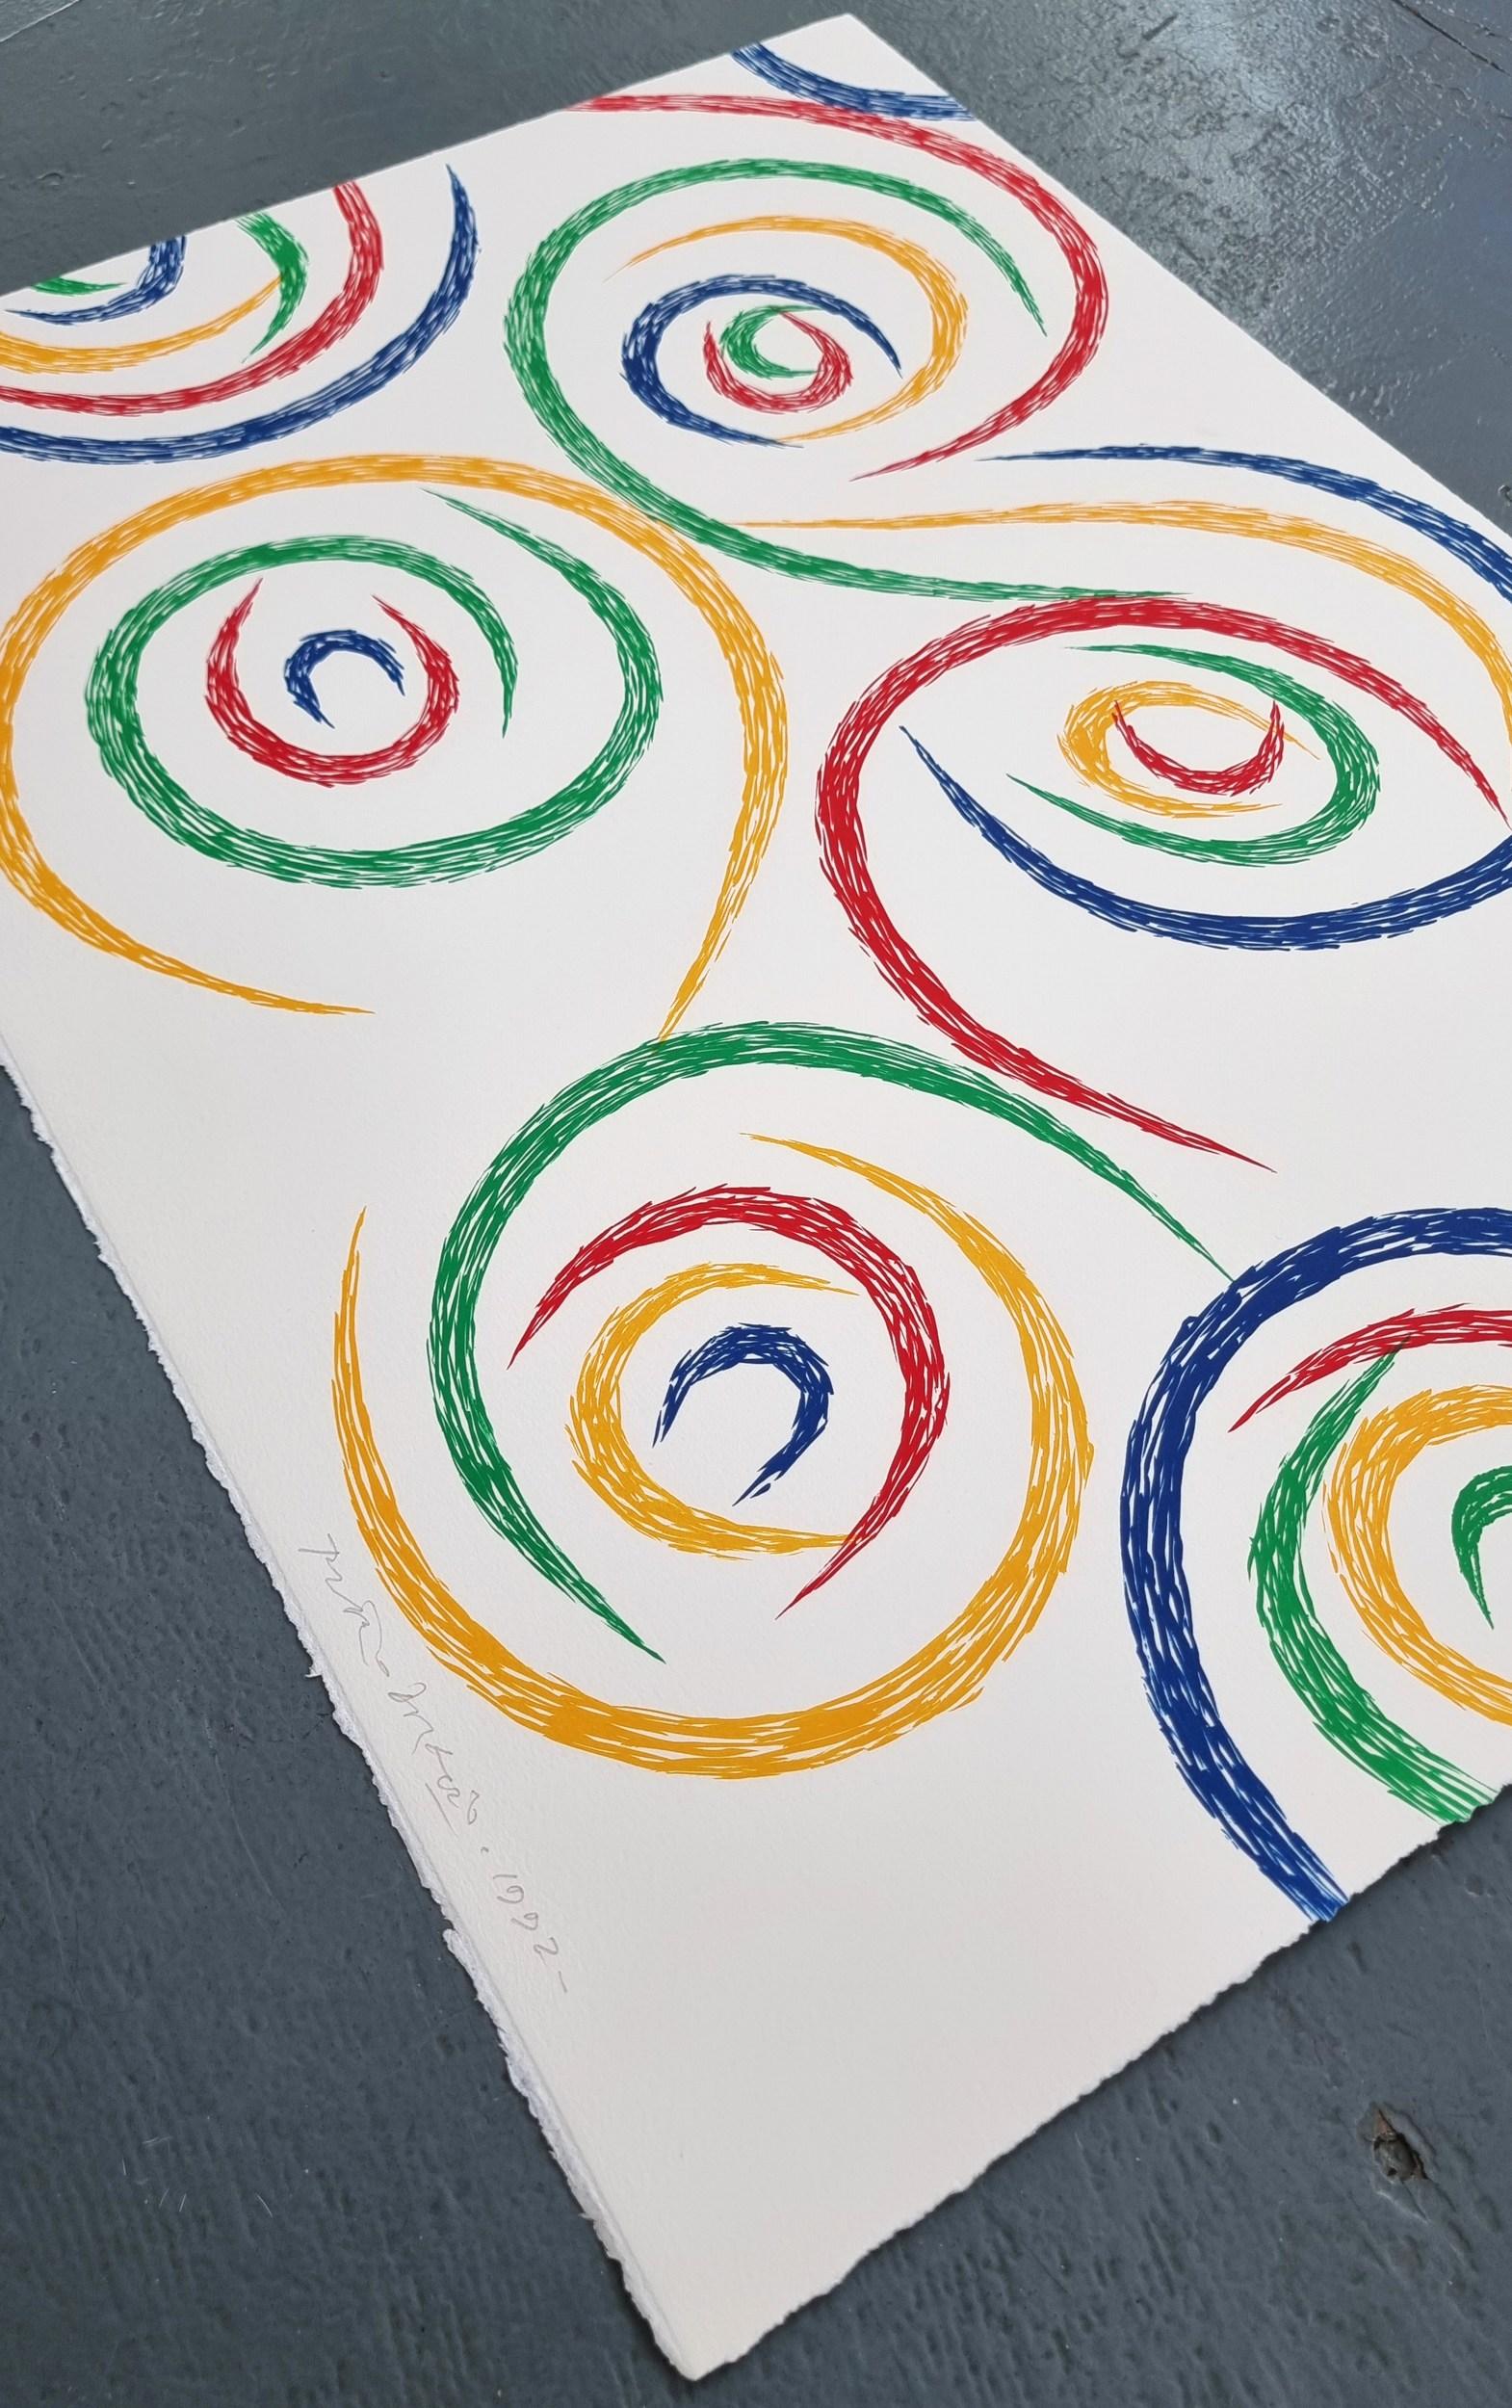 Cercles du Matin (Morning Circles) - Color Field Painting, Lyrical Abstraction  - Print by Piero Dorazio